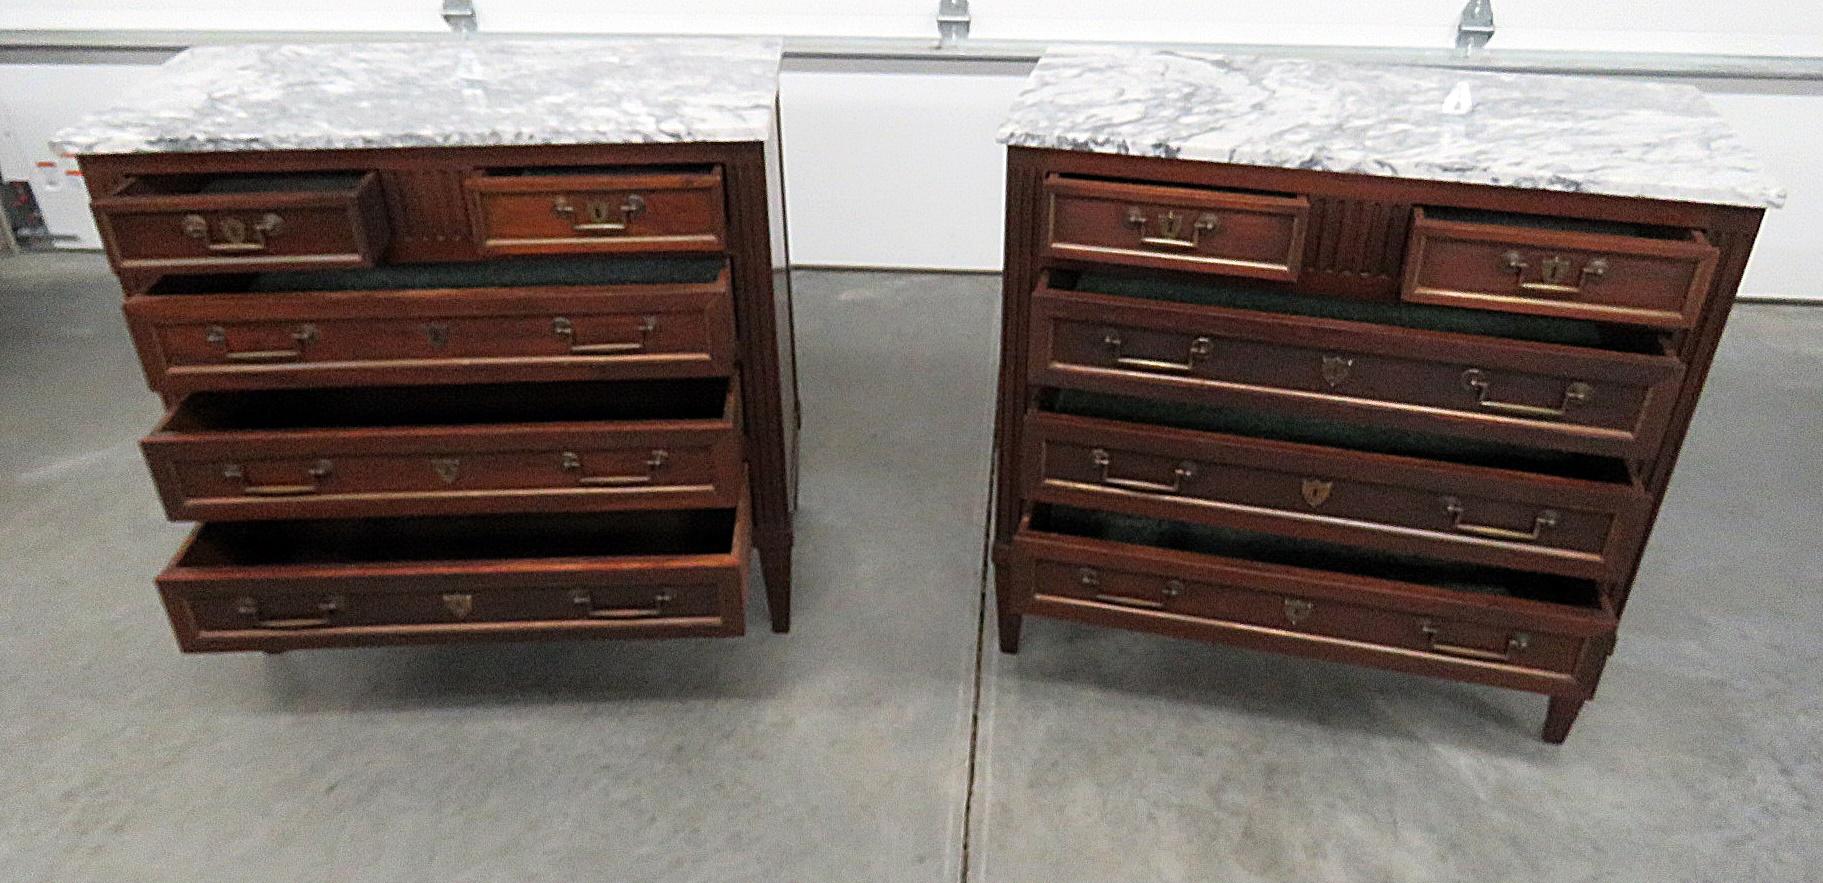 Pair of Jansen style marble-top five-drawer commodes.